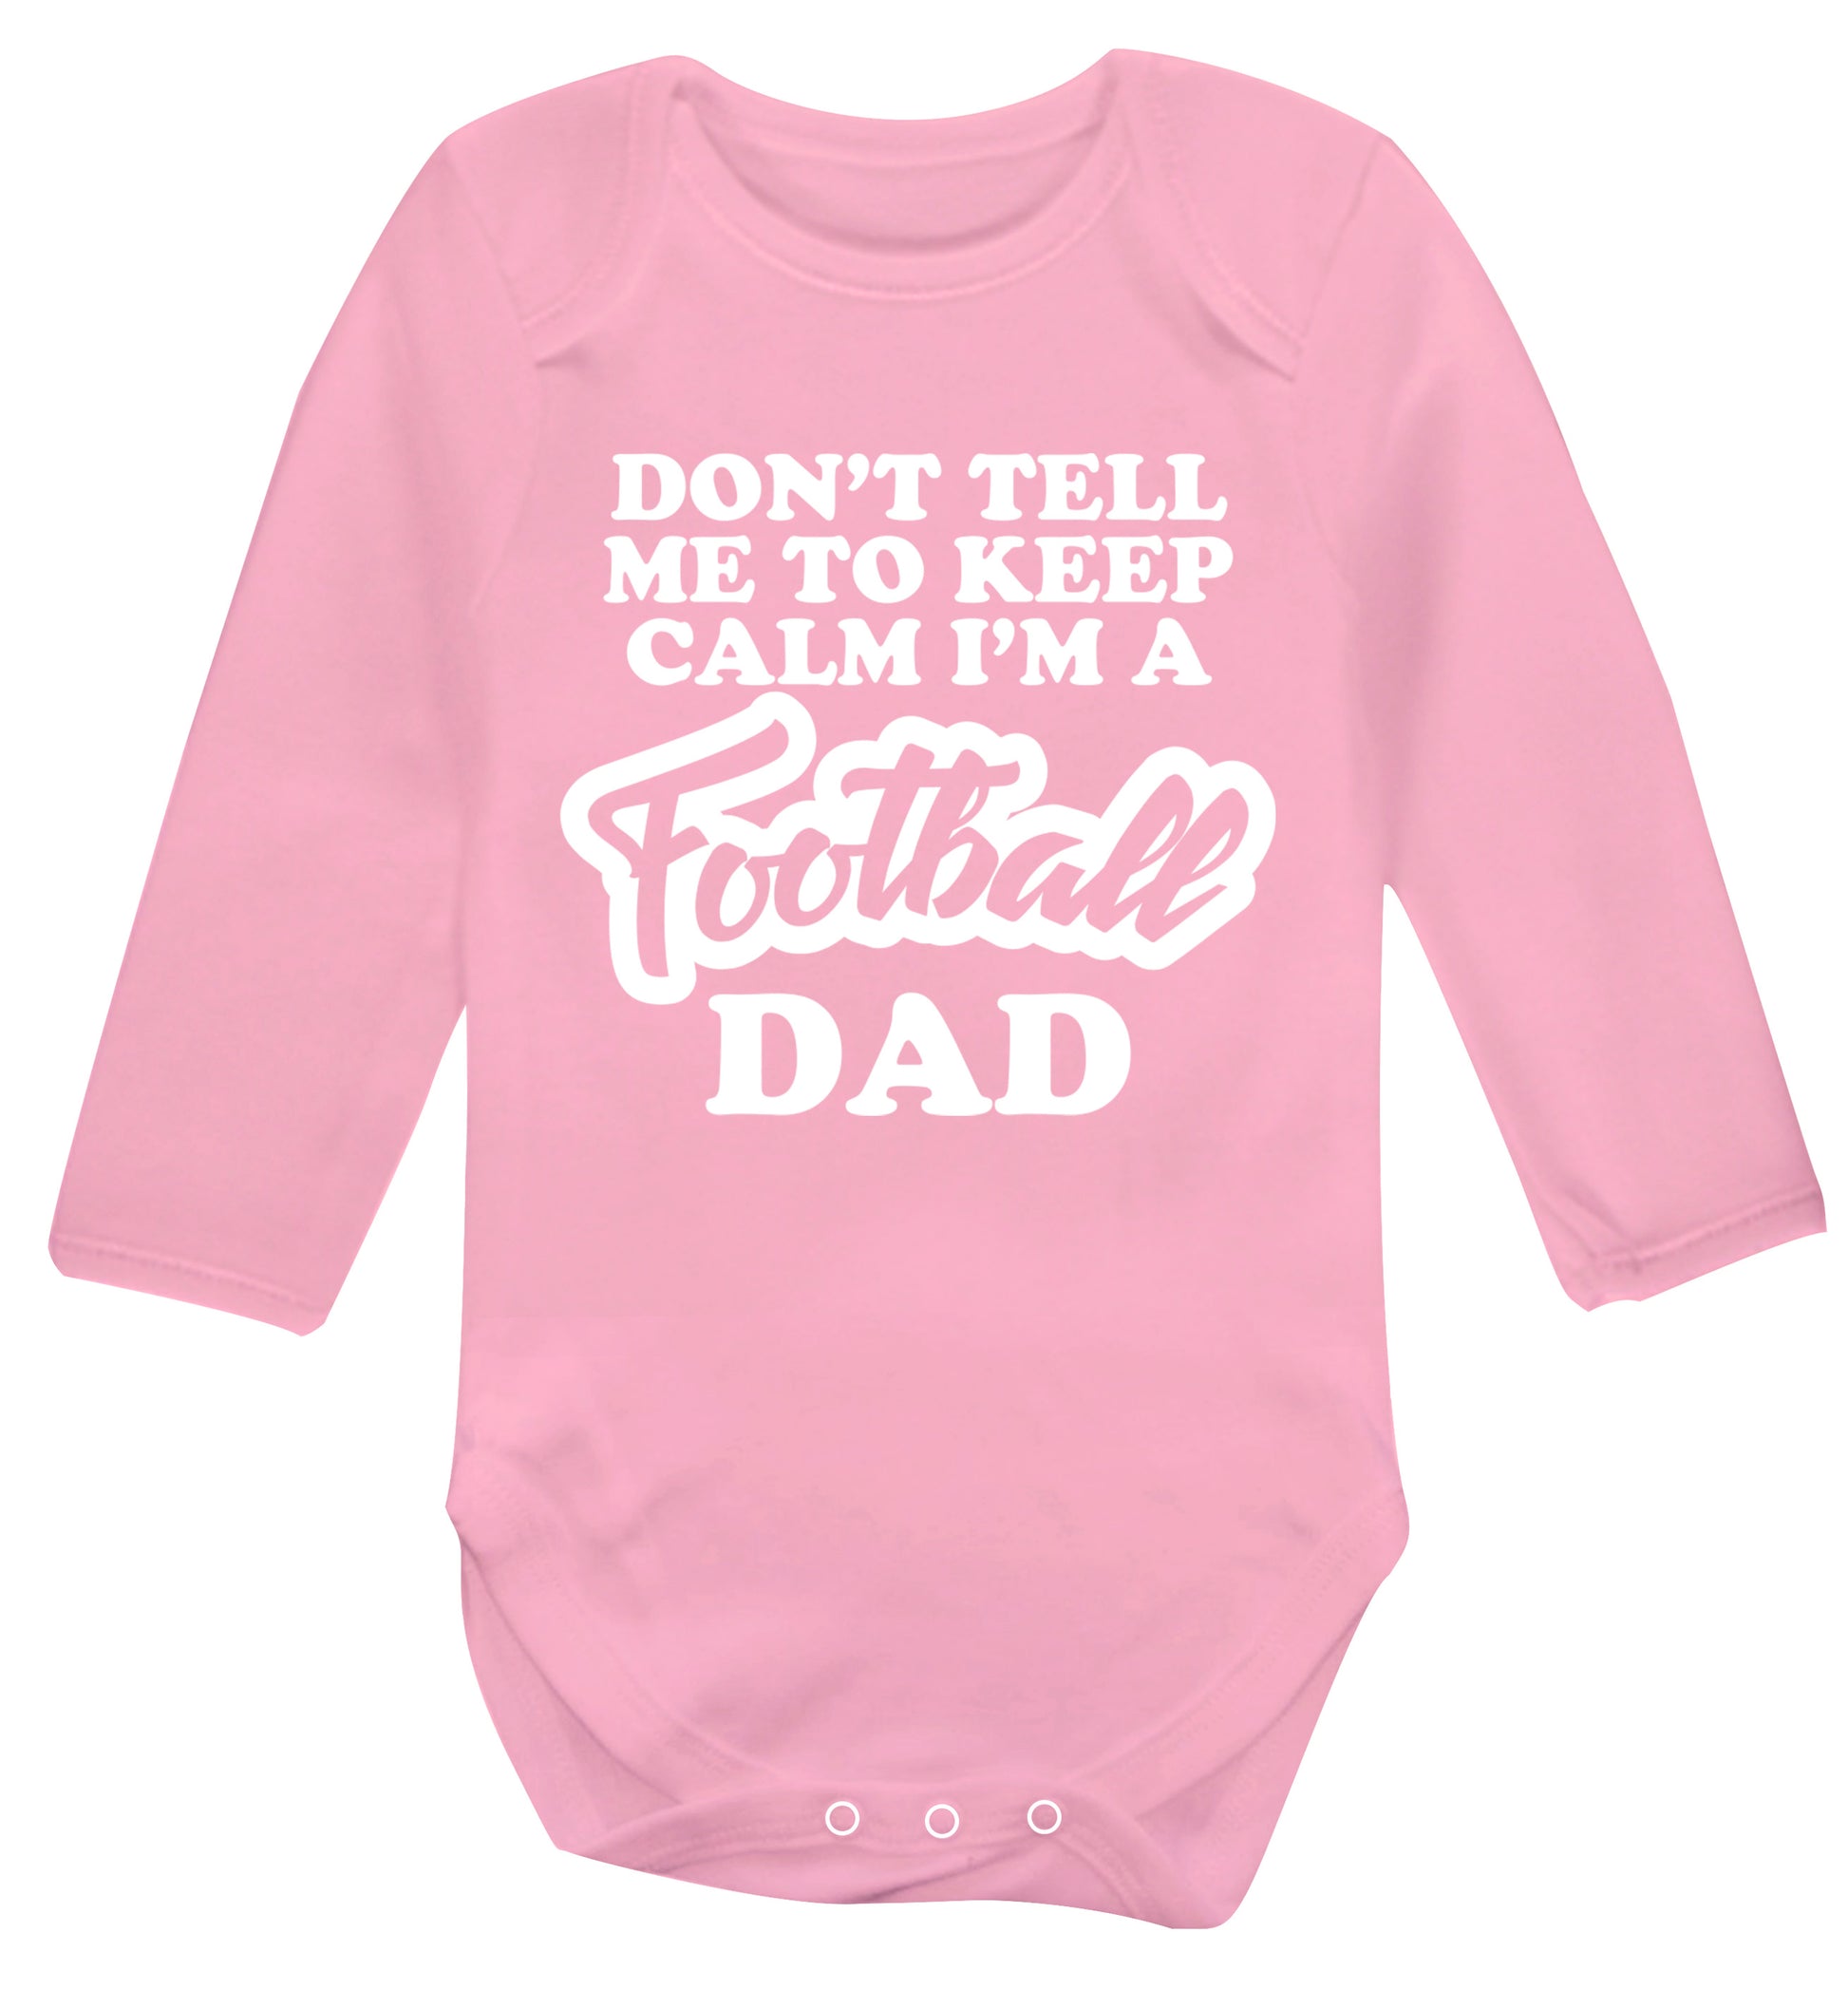 Don't tell me to keep calm I'm a football grandad Baby Vest long sleeved pale pink 6-12 months